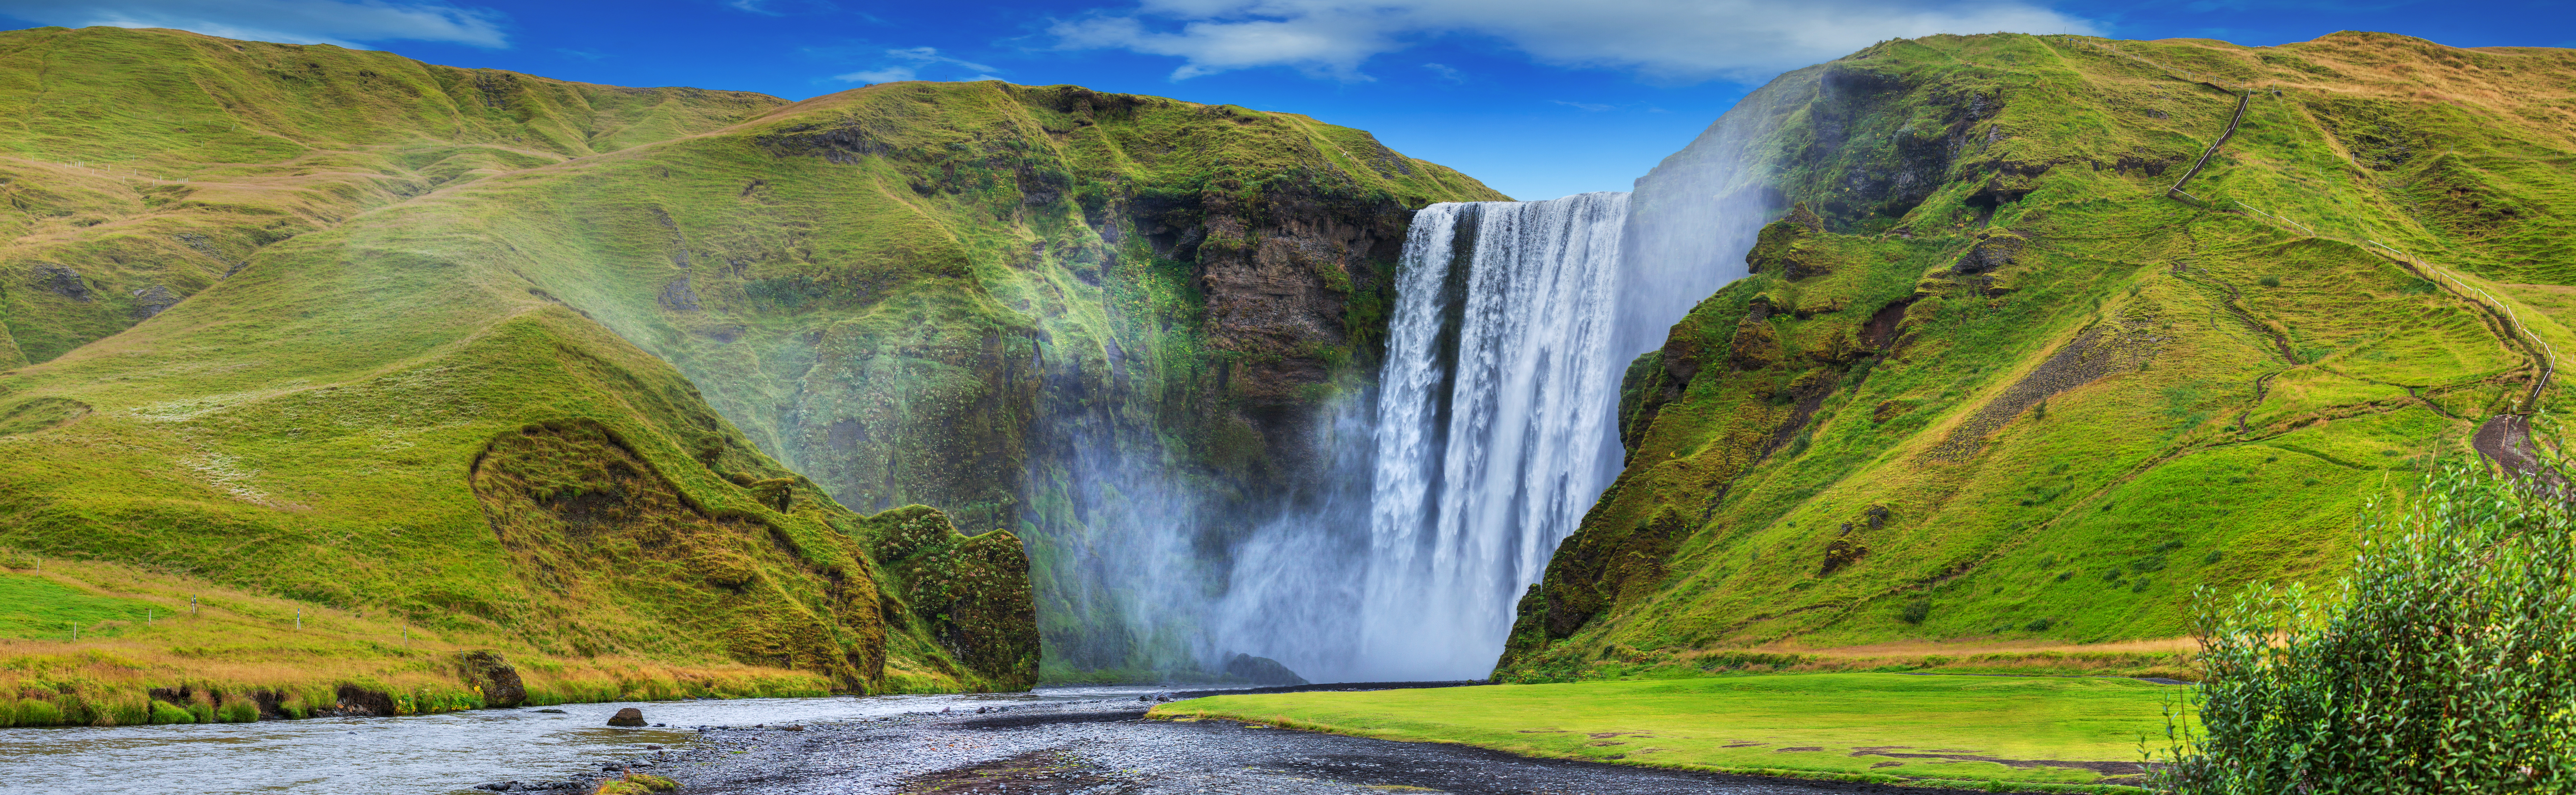 Experience the Amazing Ring Road in Iceland During a Family Vacation - Seljalandsfoss Waterfall